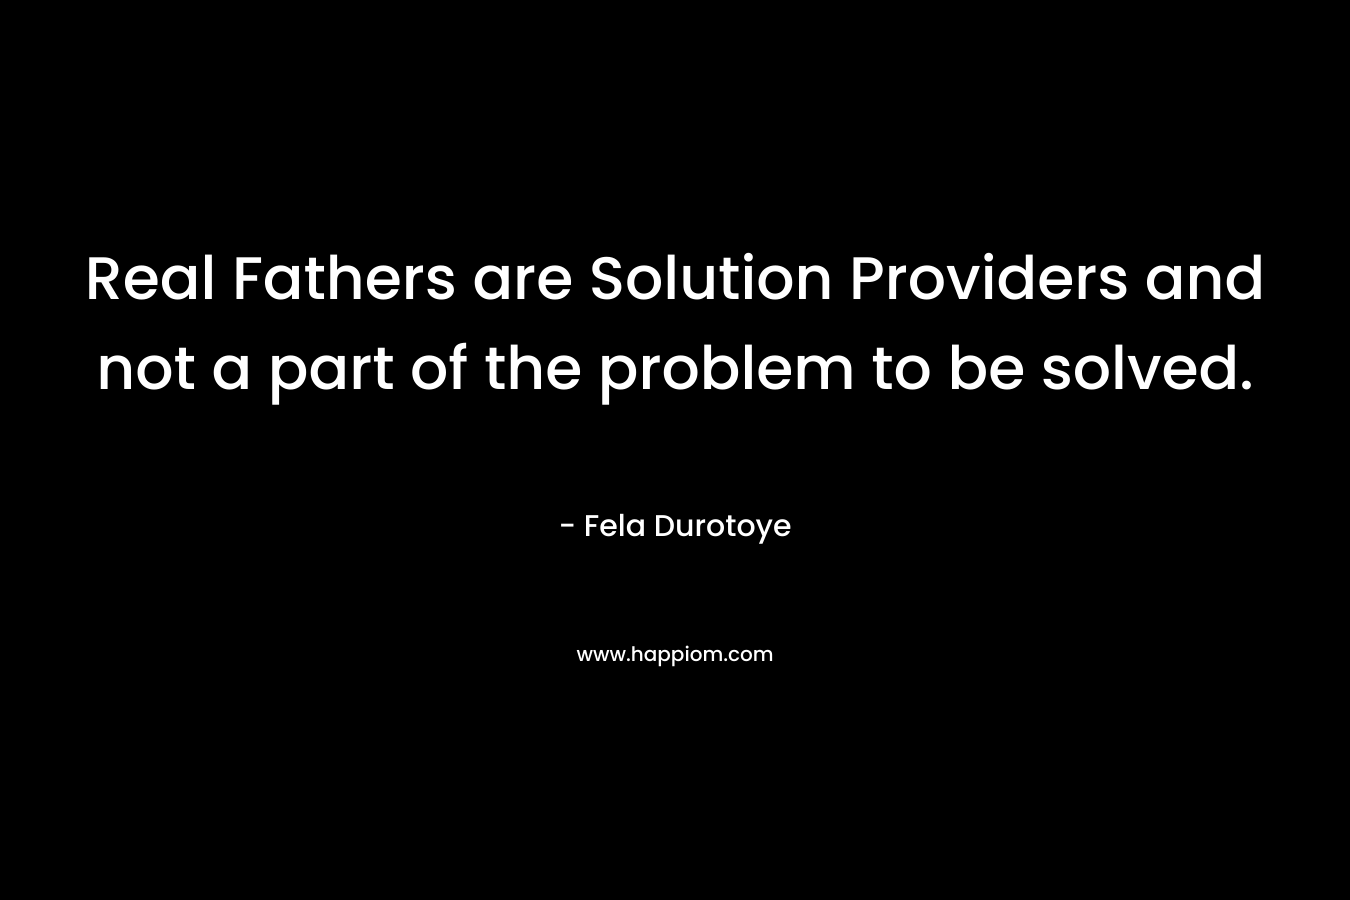 Real Fathers are Solution Providers and not a part of the problem to be solved.